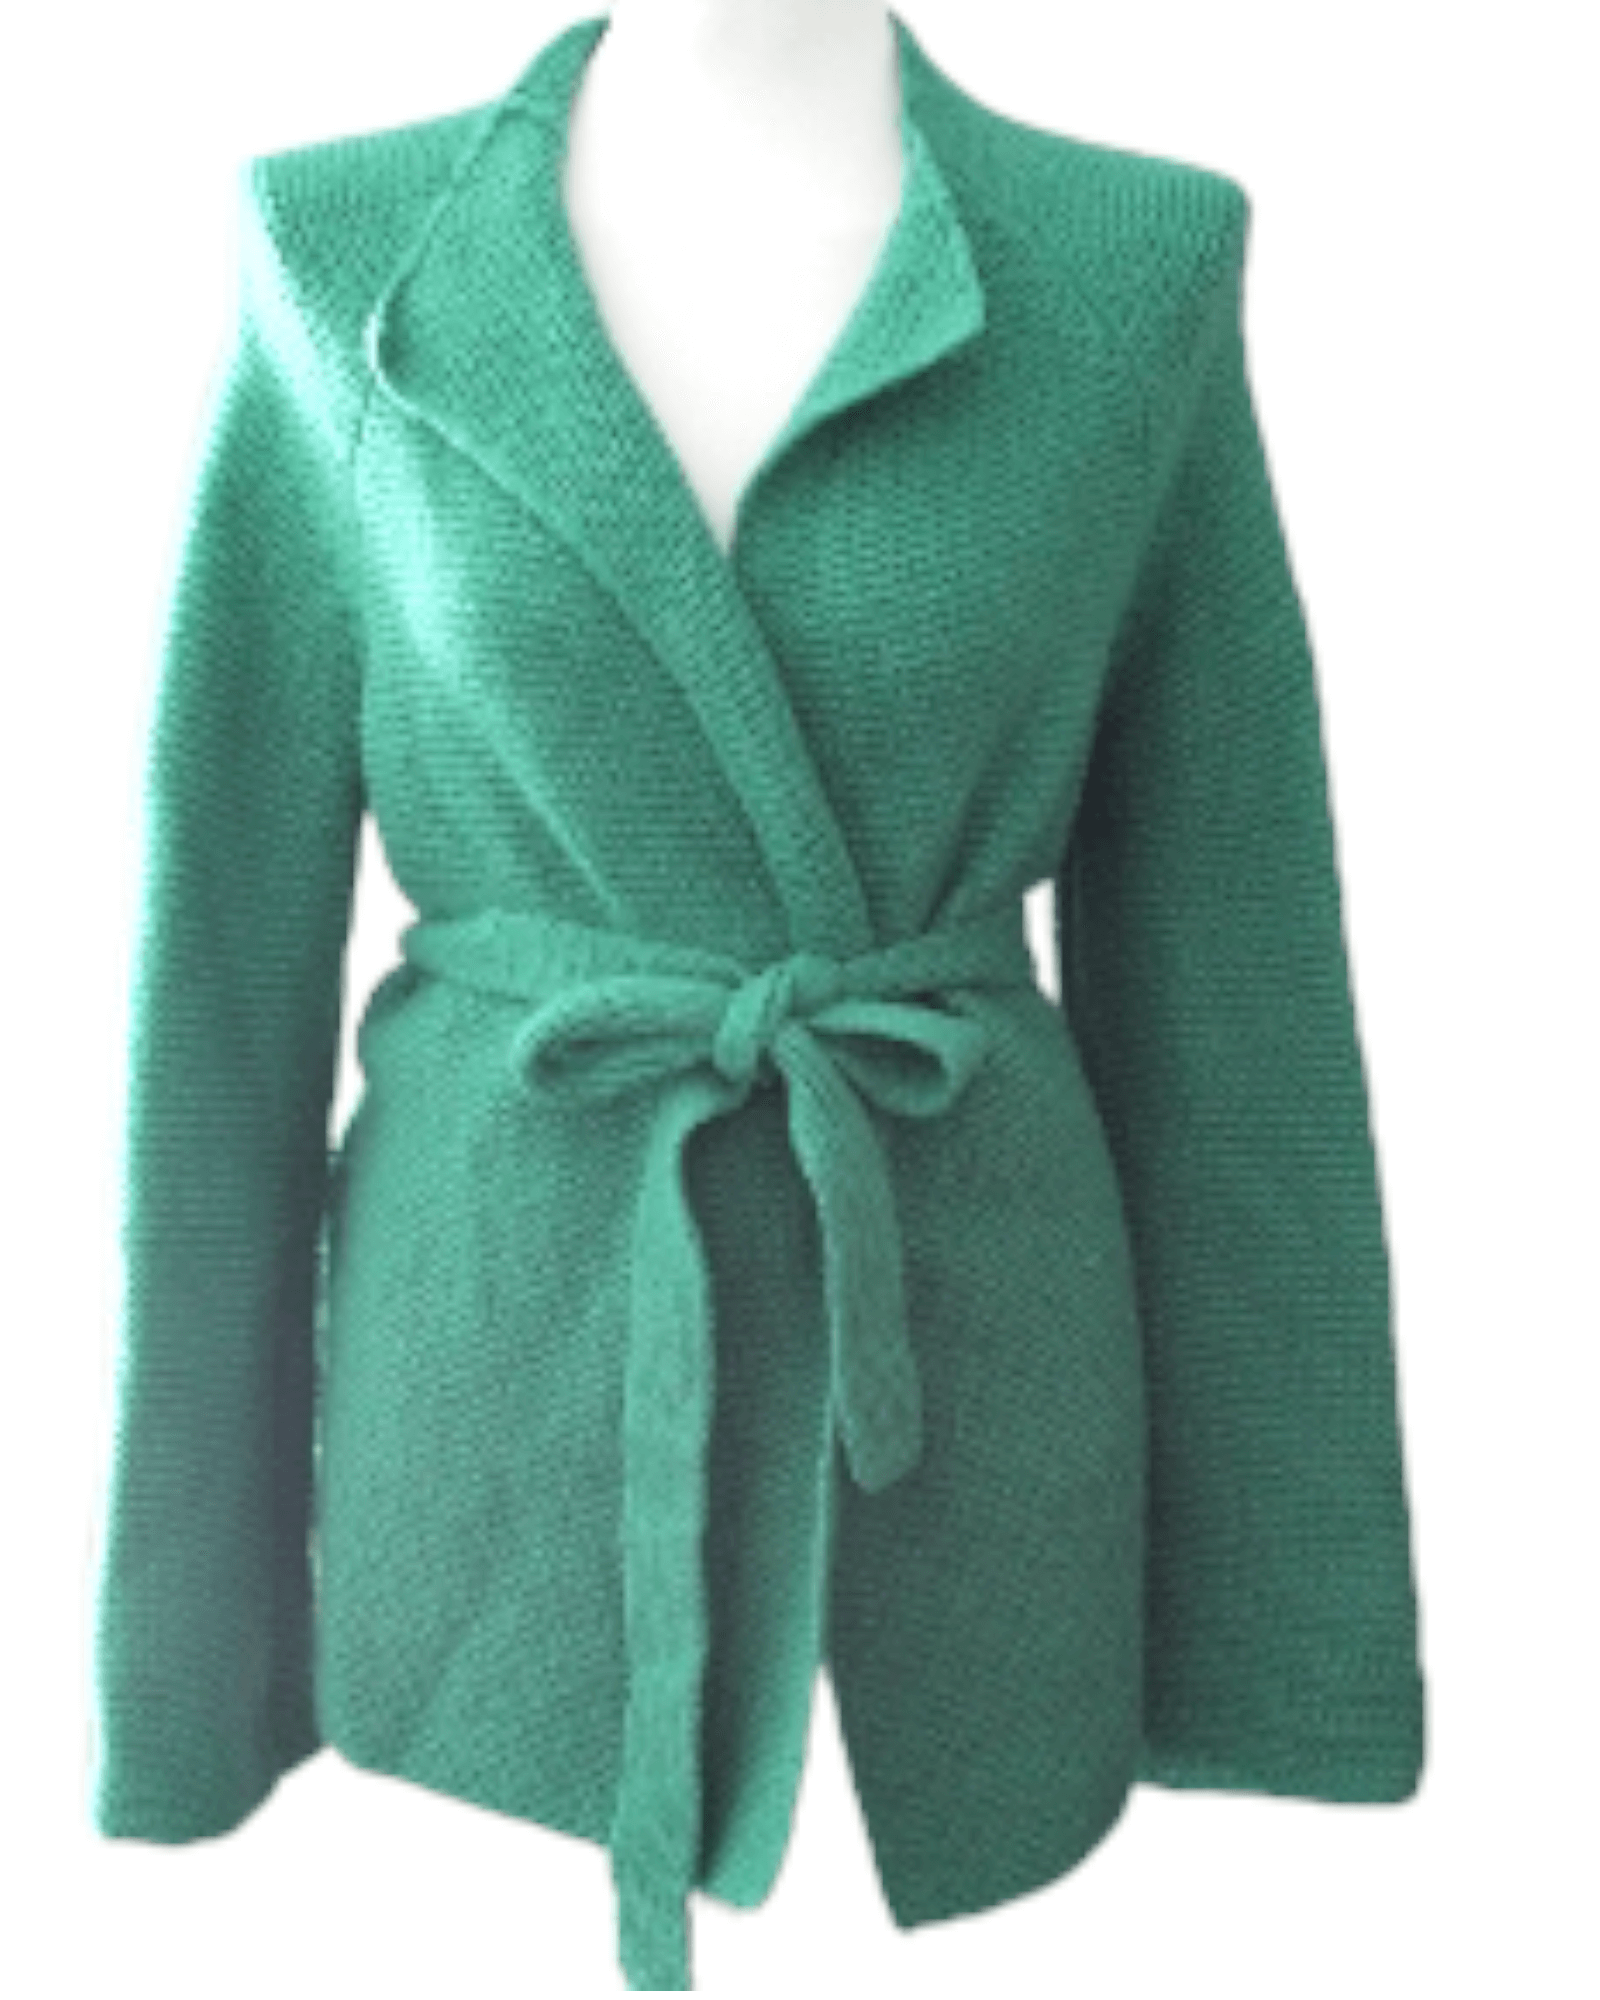 Bright Spring BODEN forest green sweater jacket